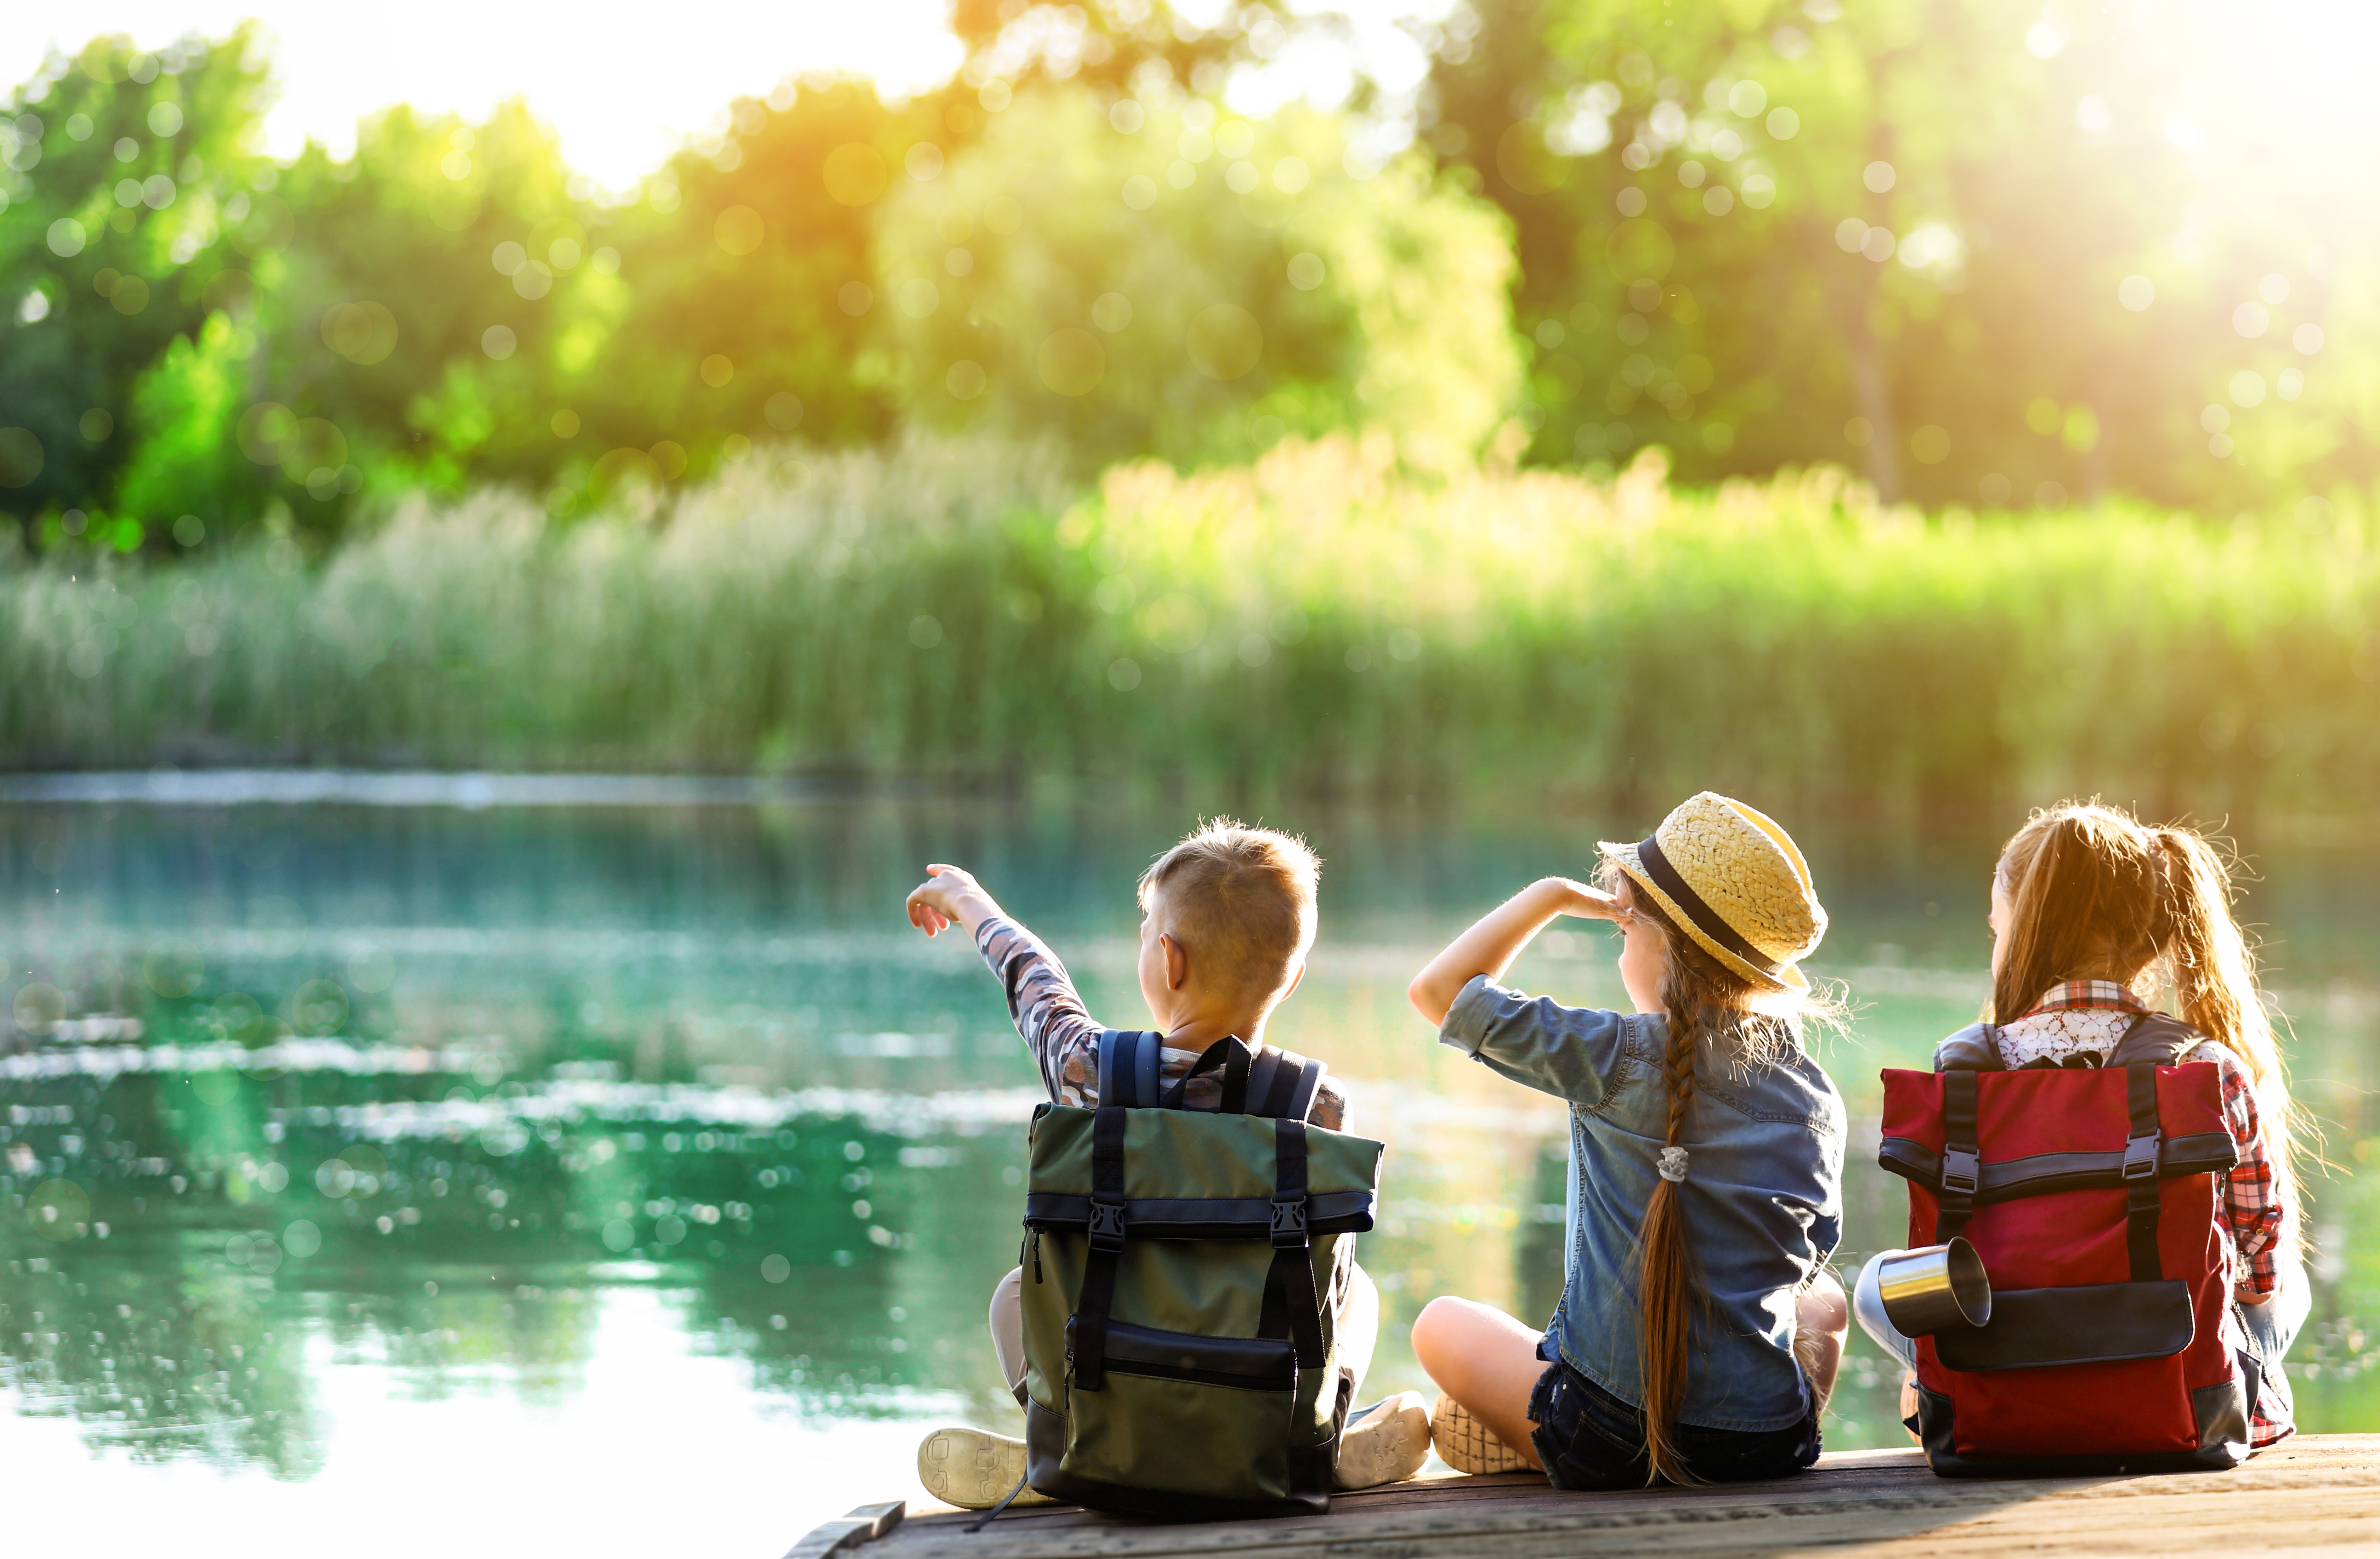 3 kids sitting on a lake surrounded by shrubbery